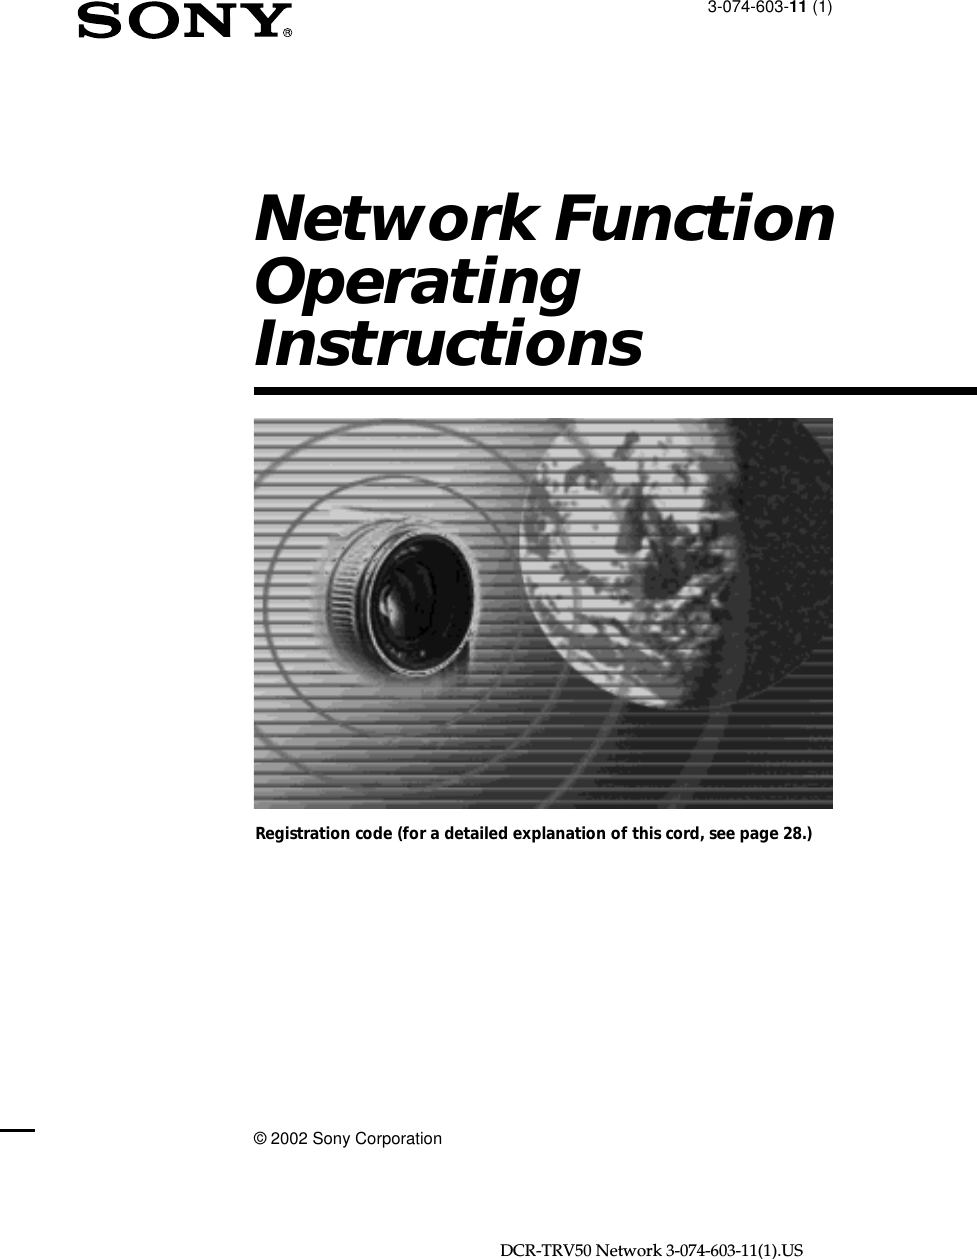 DCR-TRV50 Network 3-074-603-11(1).US3-074-603-11 (1)Network FunctionOperatingInstructions© 2002 Sony CorporationRegistration code (for a detailed explanation of this cord, see page 28.)